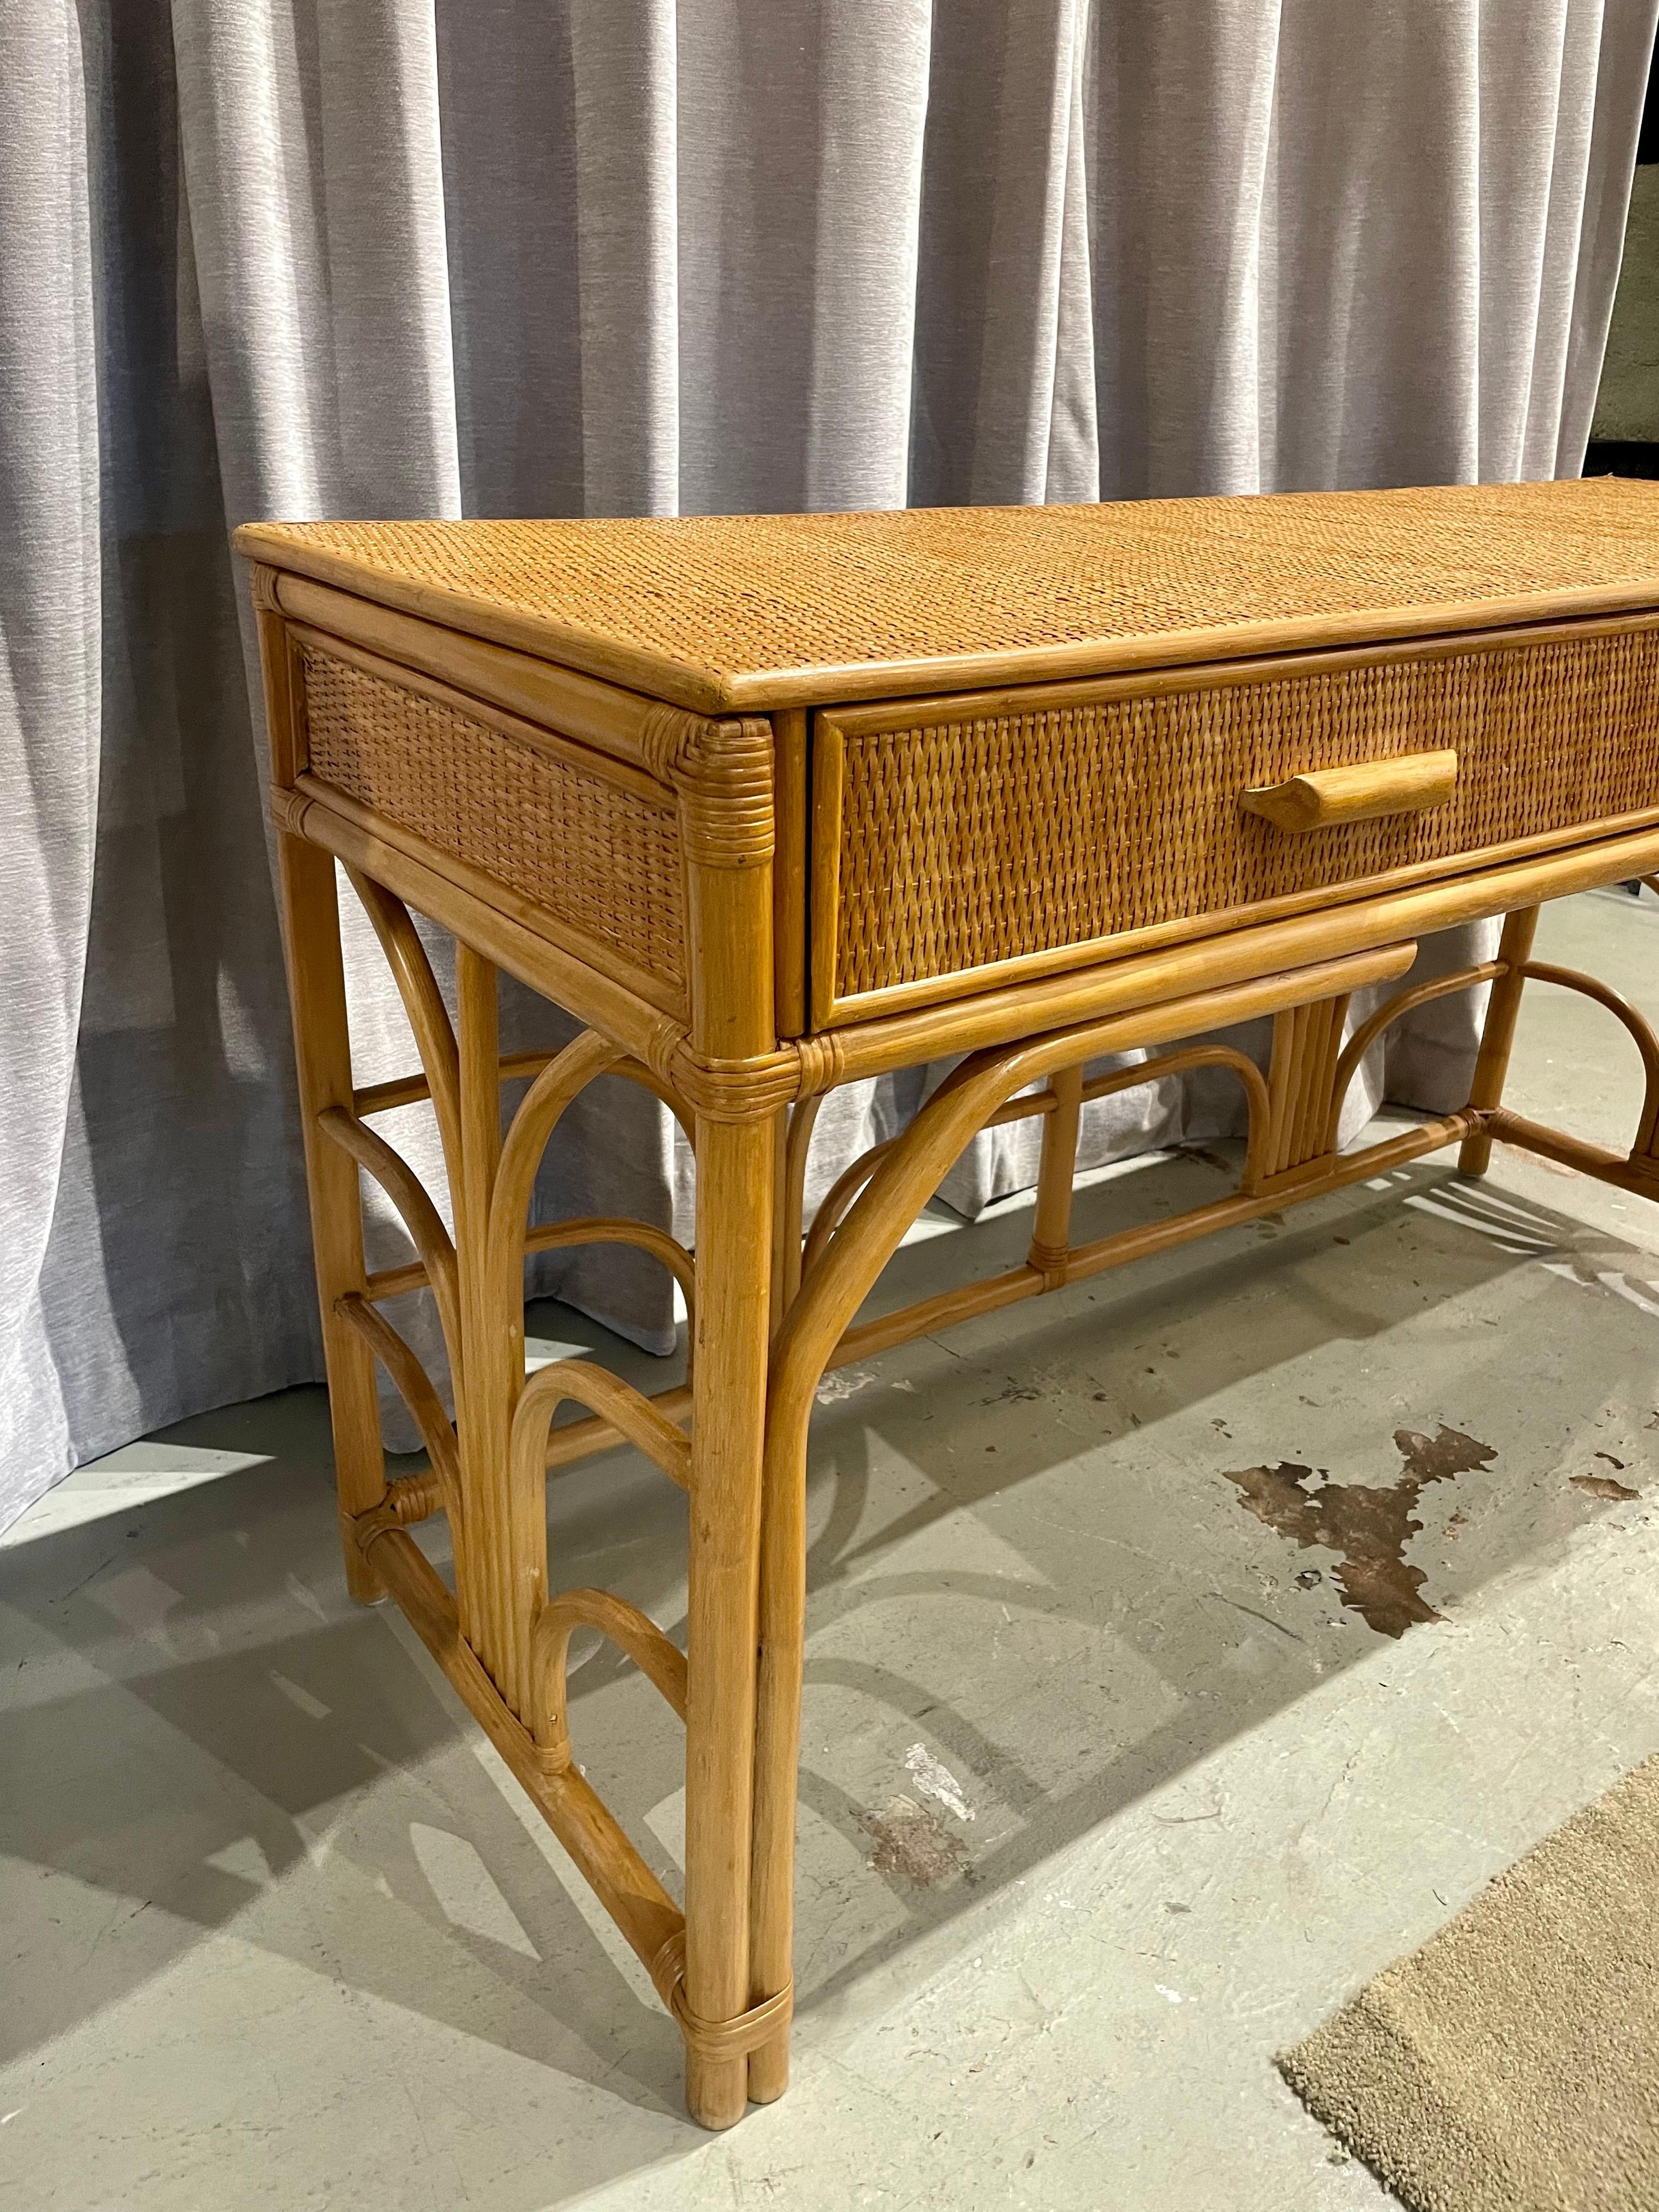 This wonderful console table that can also double as a desk, is comprised of two drawers and a wonderful bent bamboo design throughout. The grass cloth top and sides are in very clean, hardly used condition.